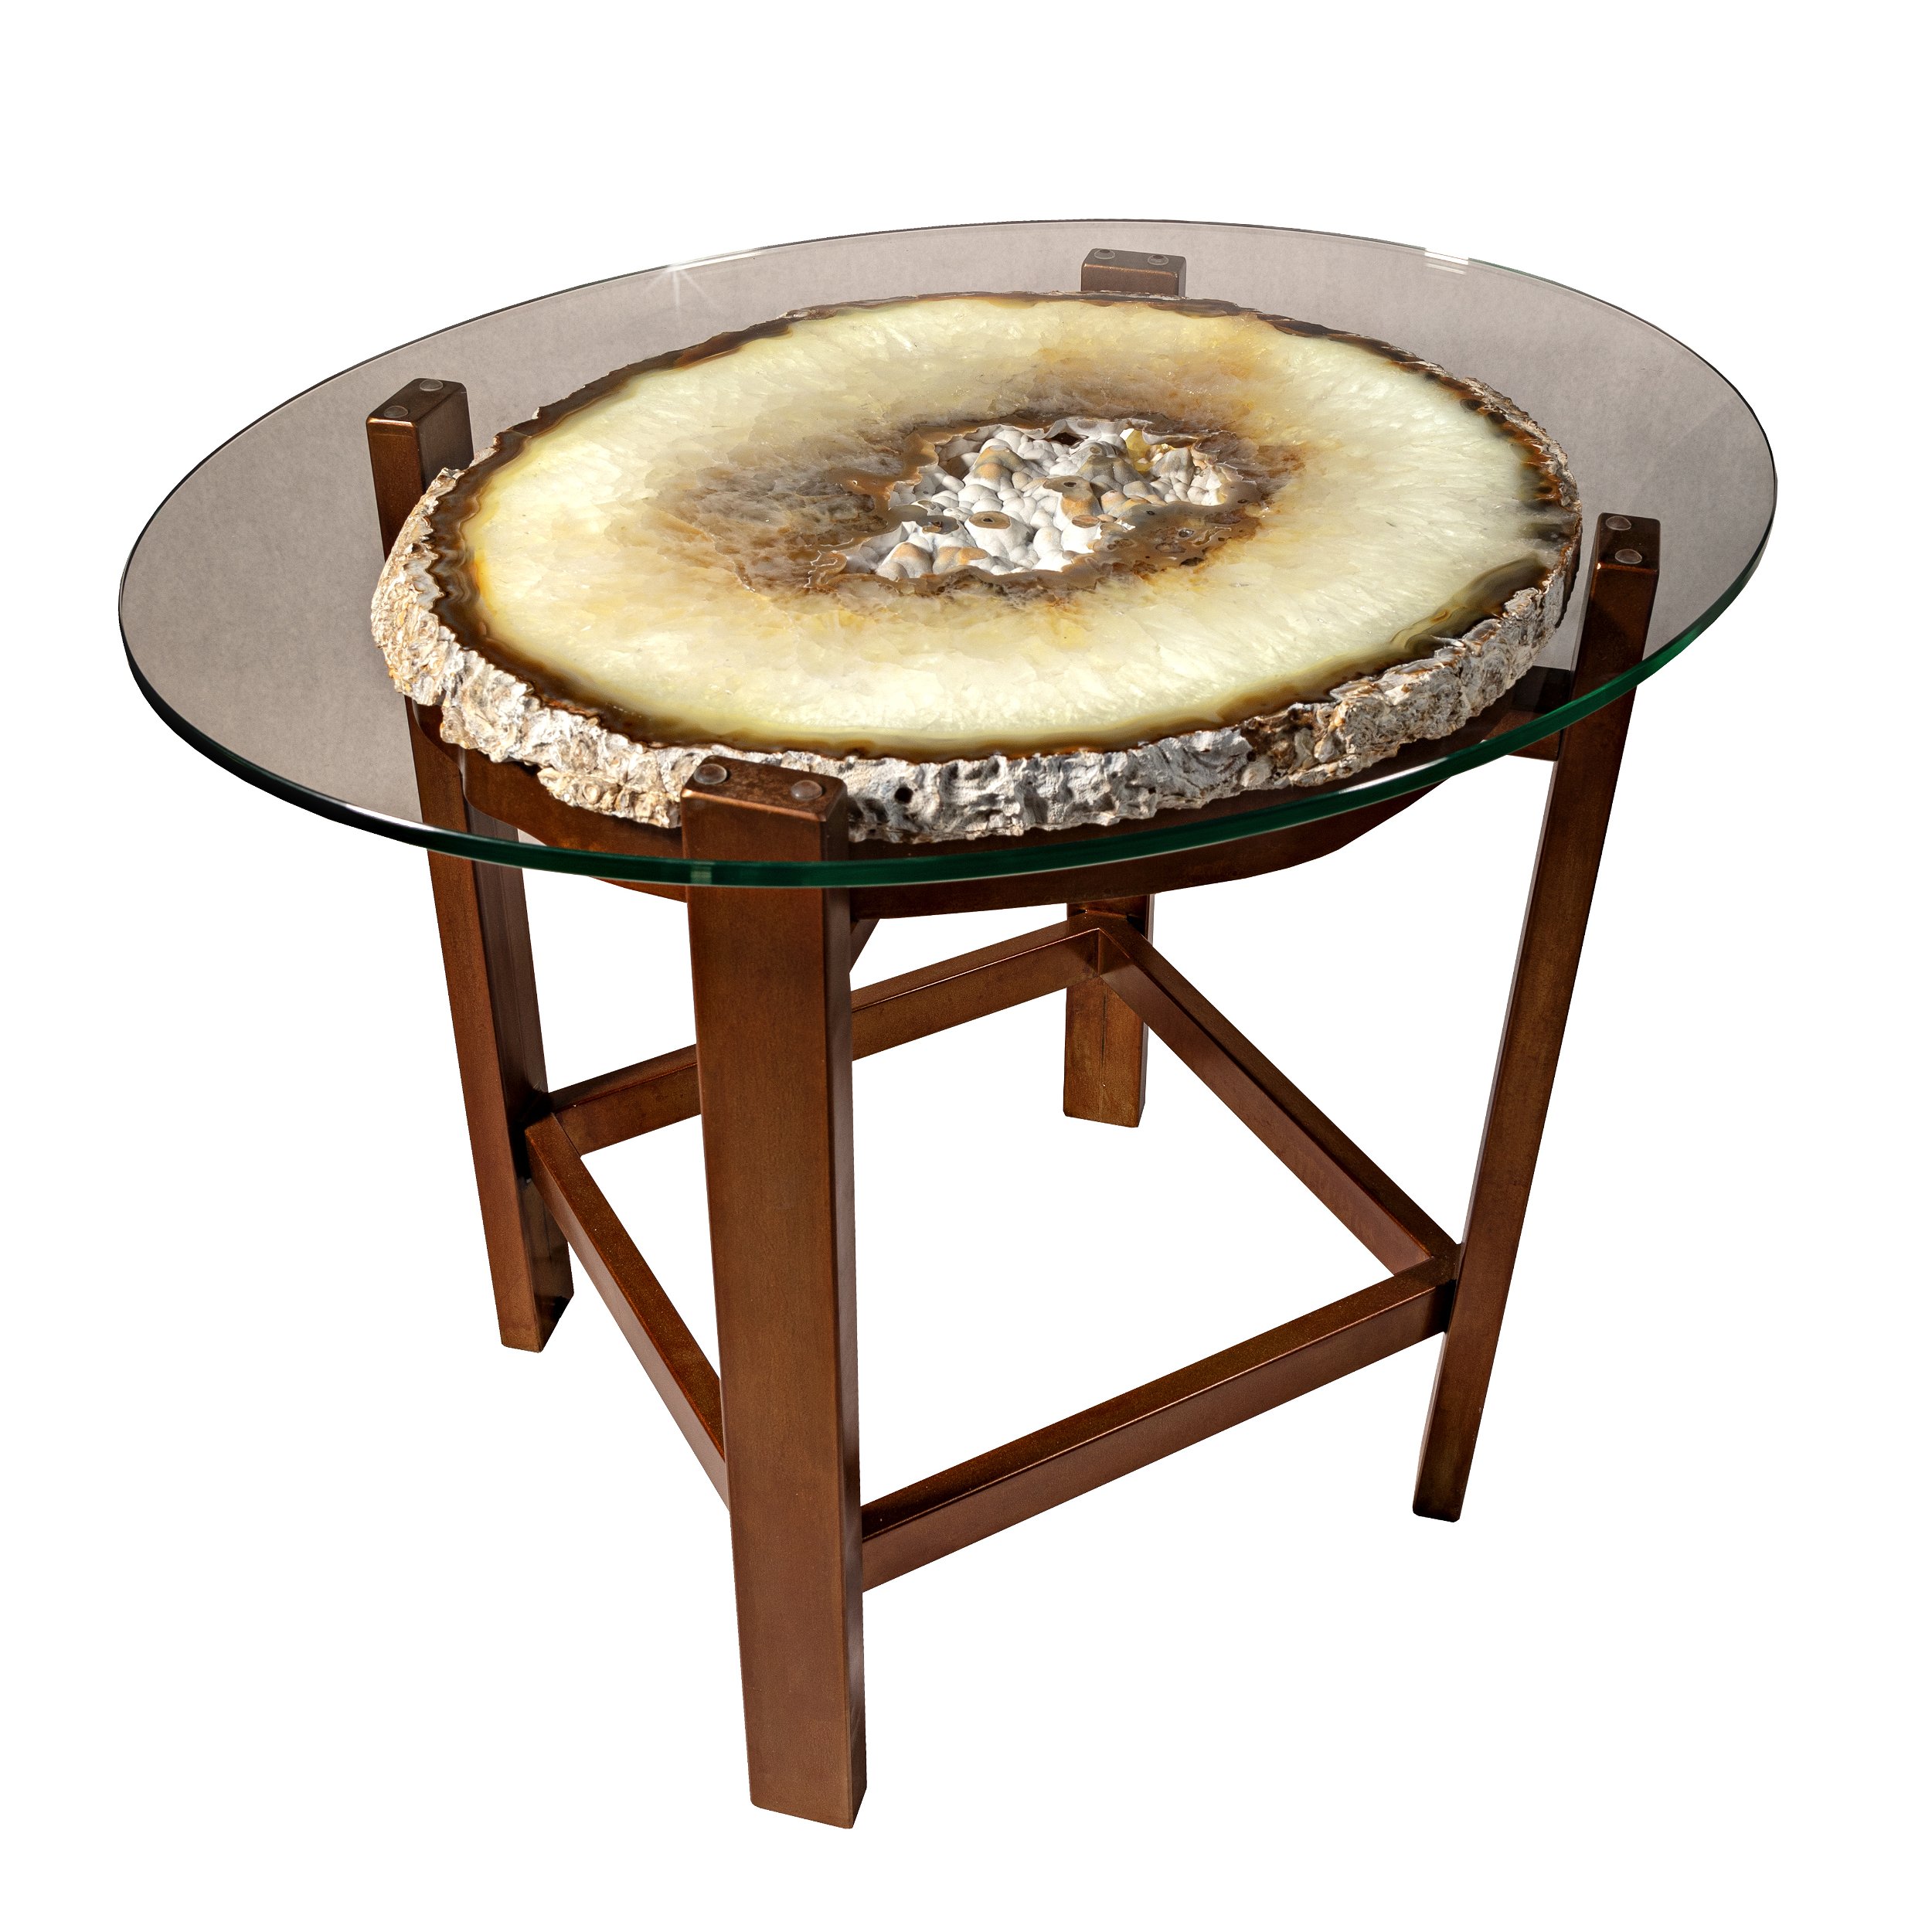 Illuminated Agate Coffee Table With White Agate Interior And Camel Brown Edge And Glass Top